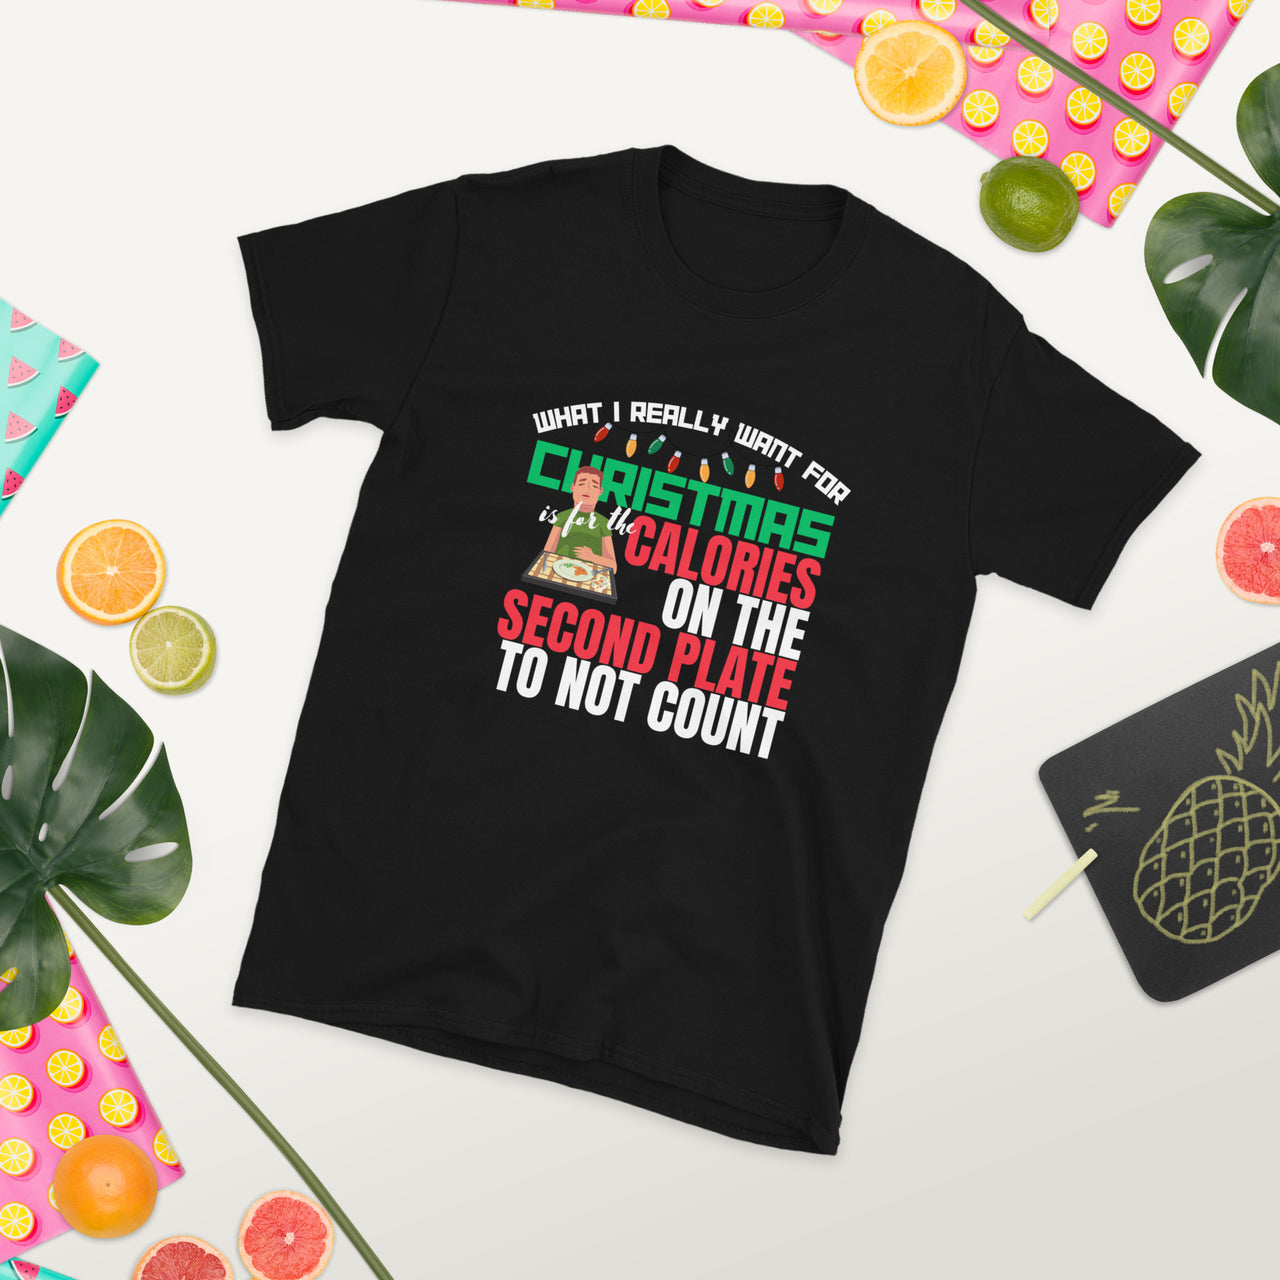 Calorie-Free Christmas Second Plate T-Shirt